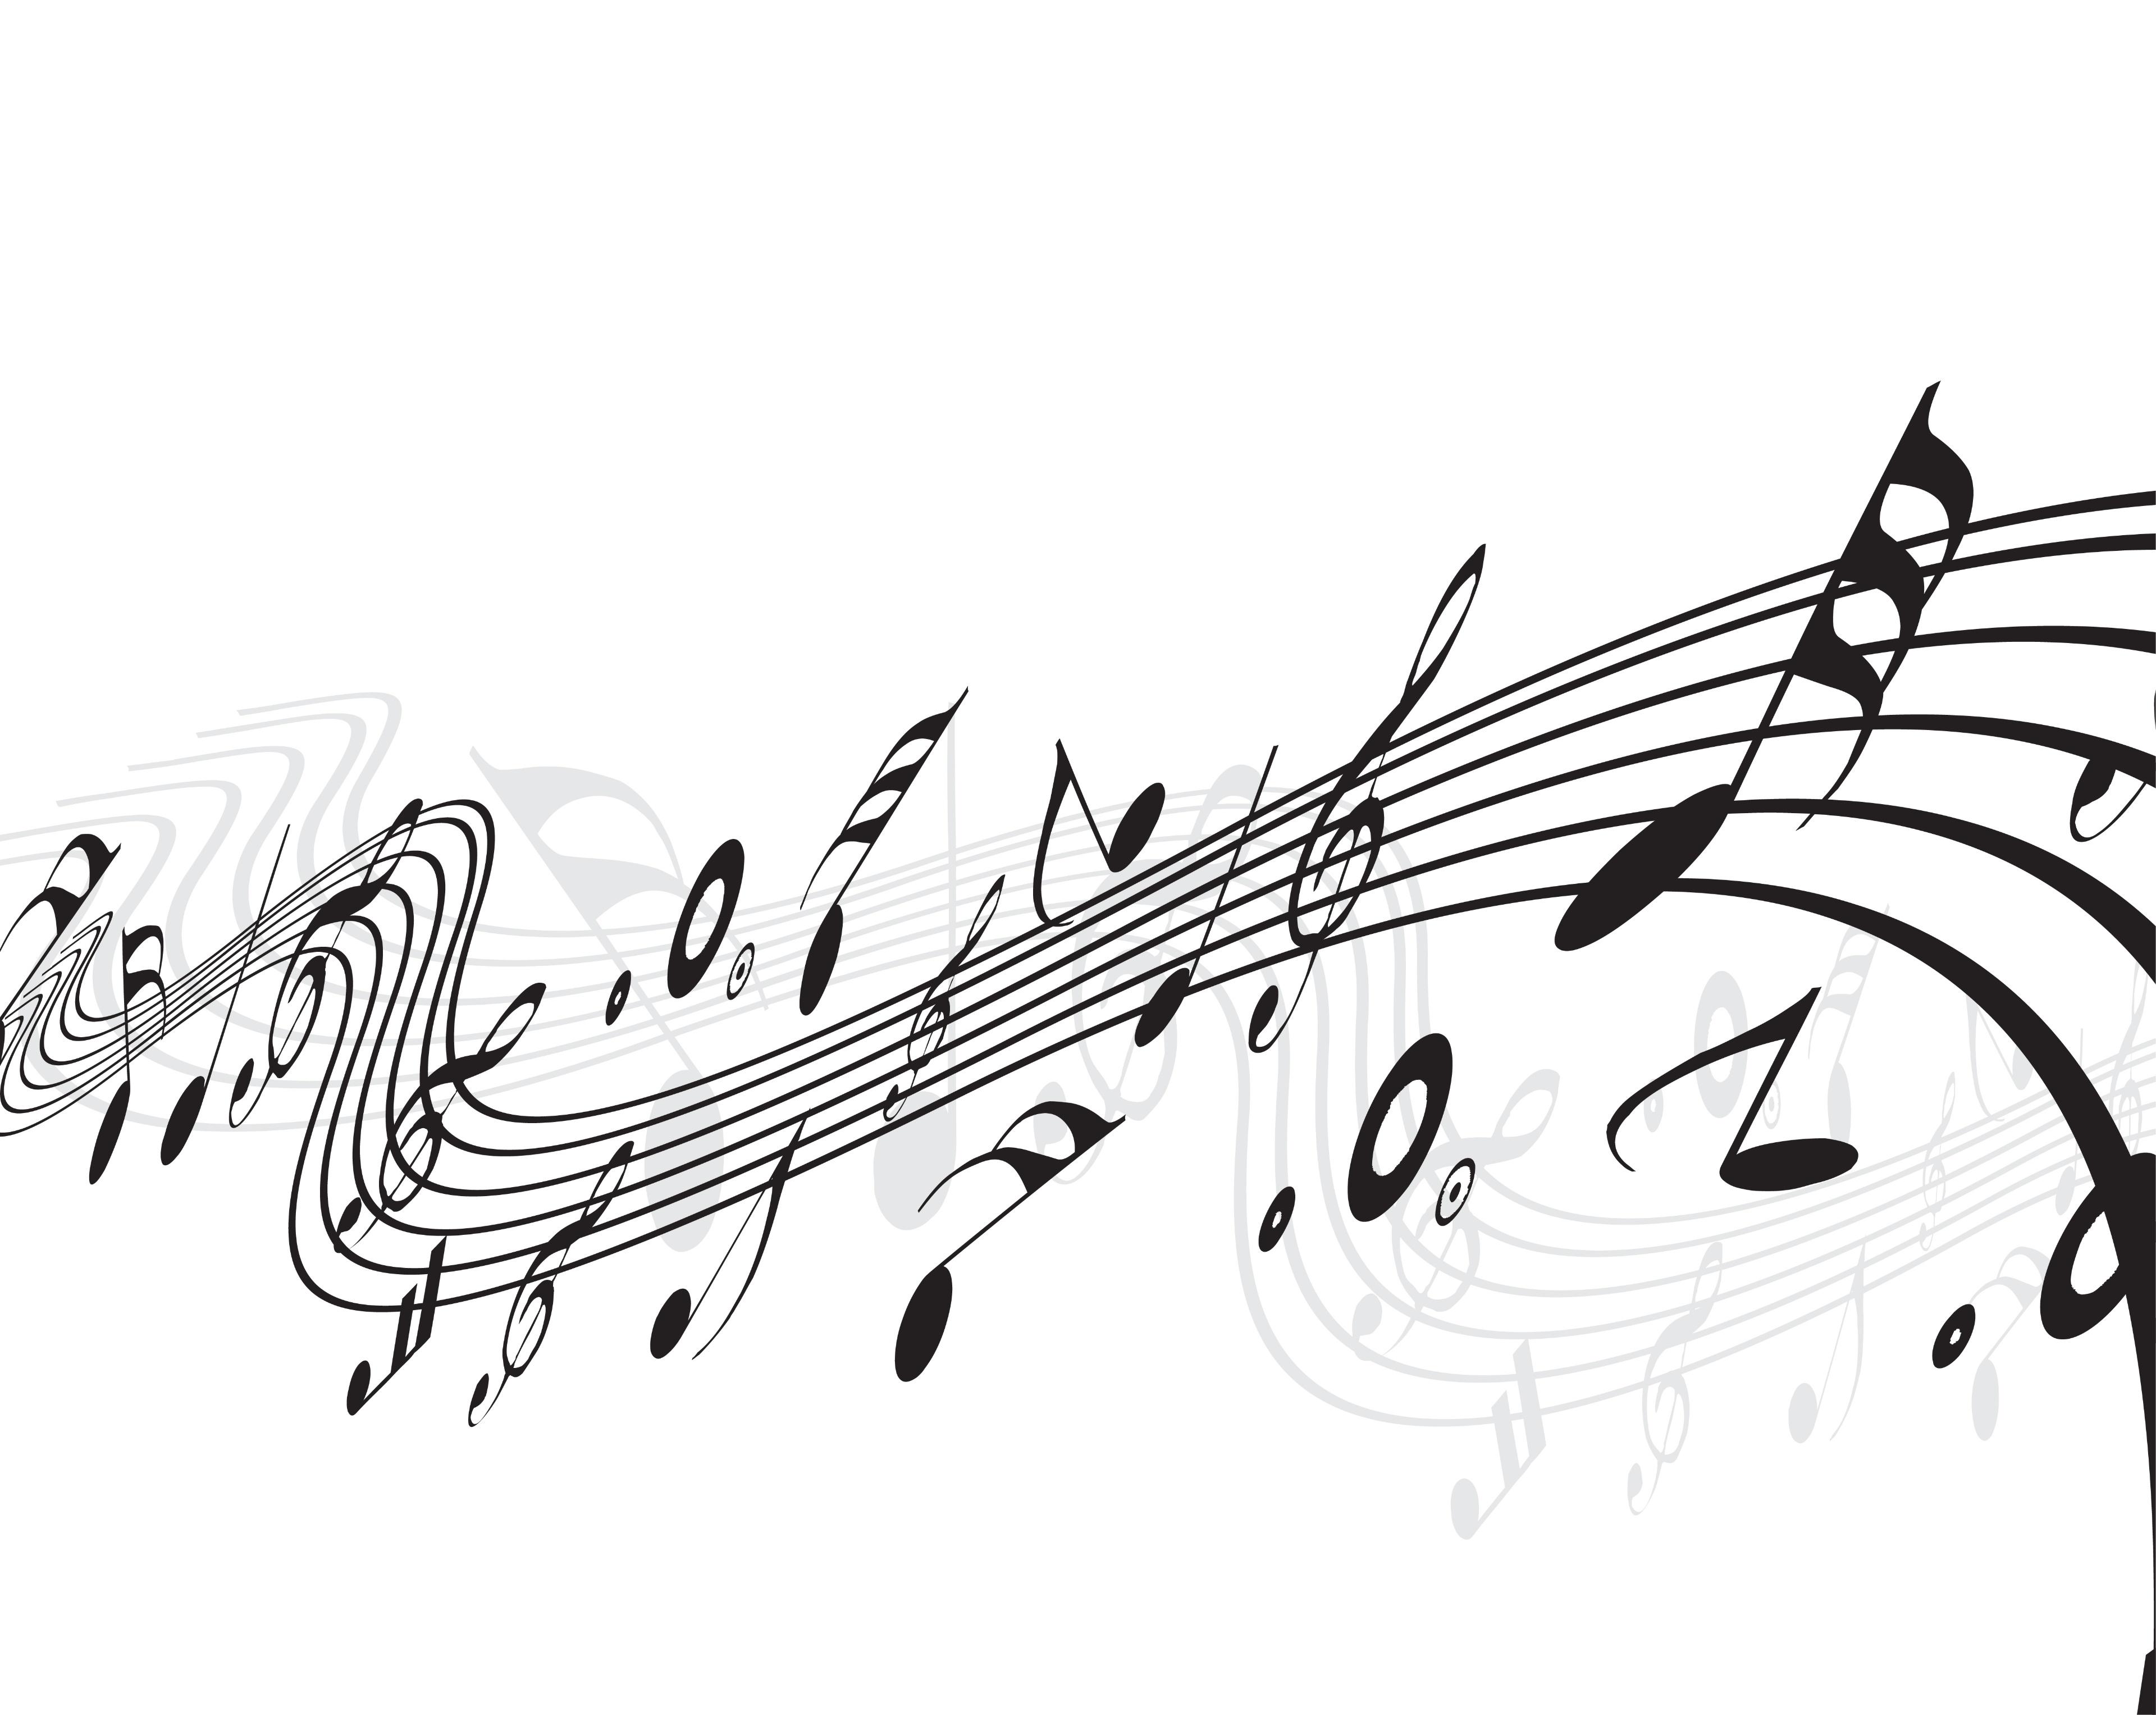 https://ru.freepik.com/free-vector/music-note-with-wave-line-design-background_24775427.htm#query=нотный%20стан&position=26&from_view=search&track=ais&uuid=558f022c-f6b8-4144-9f93-7517953e7ba8